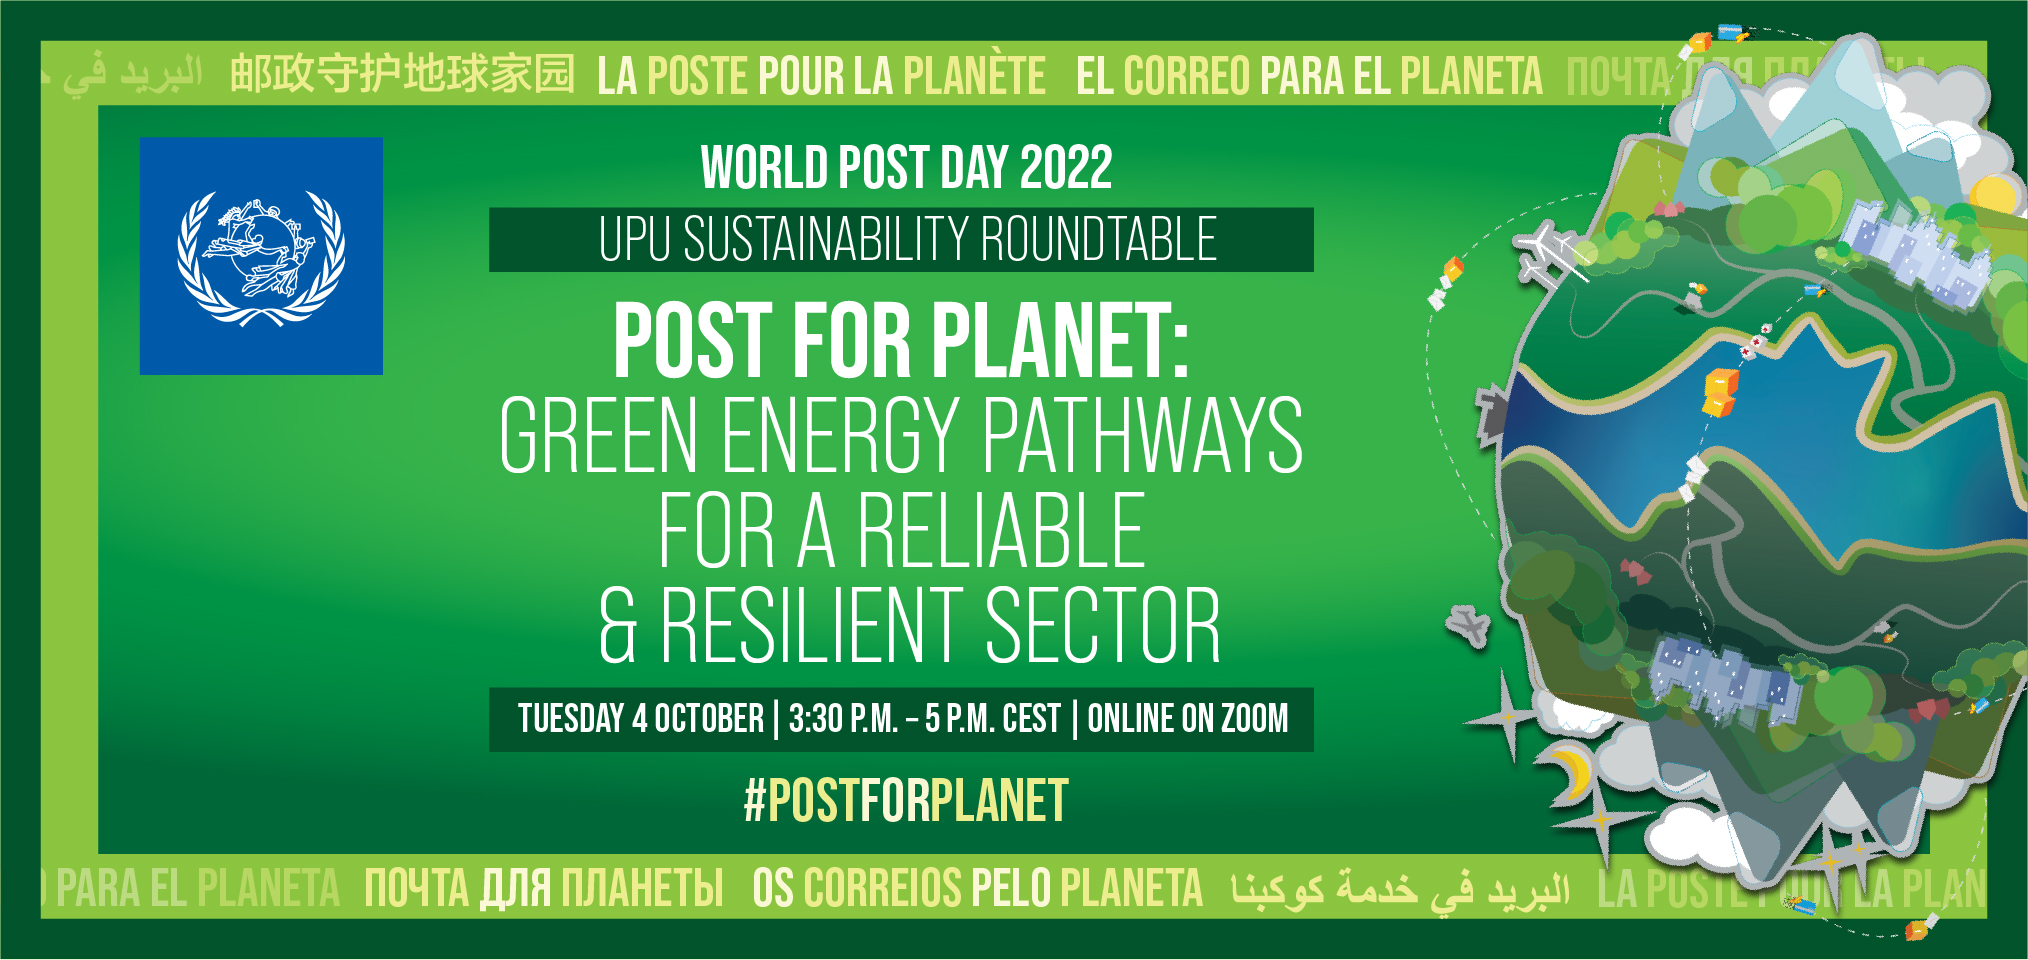 Post for planet: Green energy pathways for a reliable & resilient sector